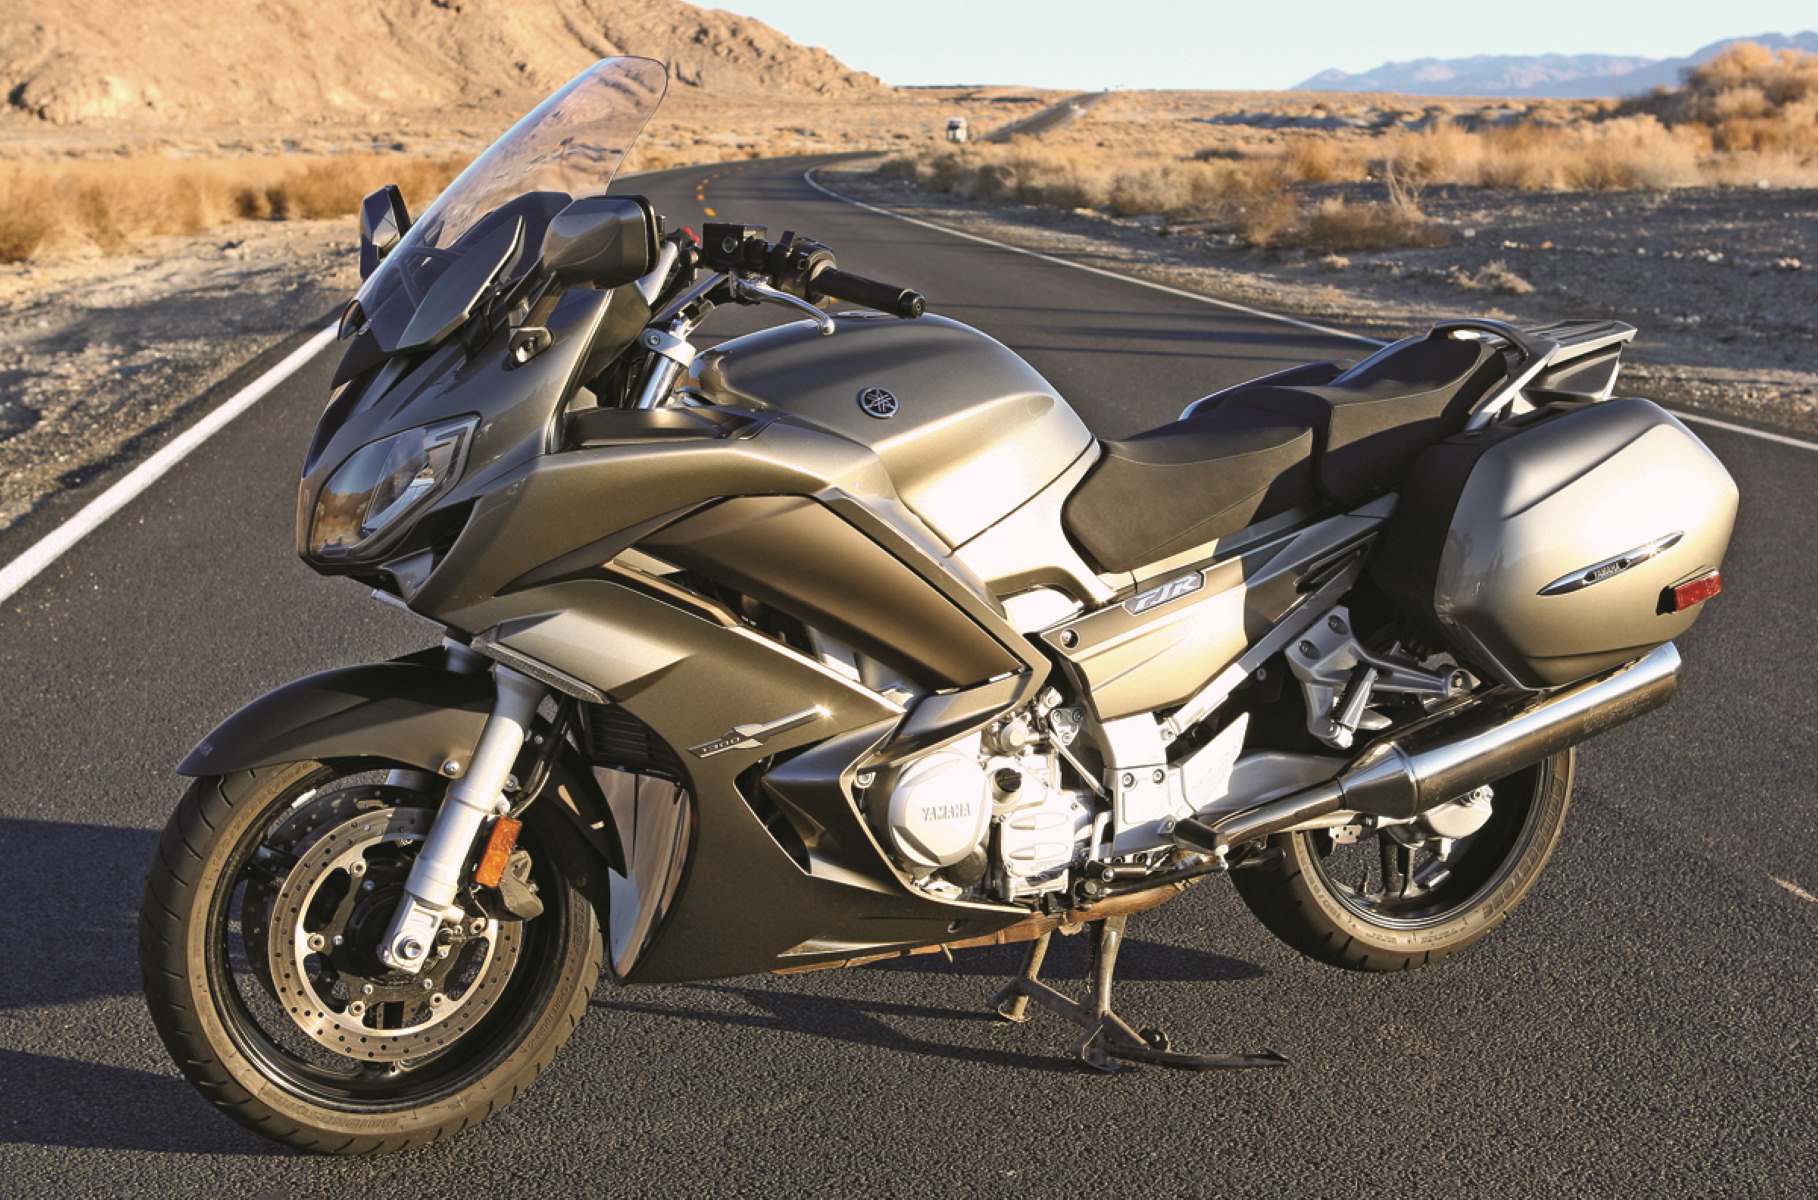 18-mind-blowing-facts-about-yamaha-fjr1300